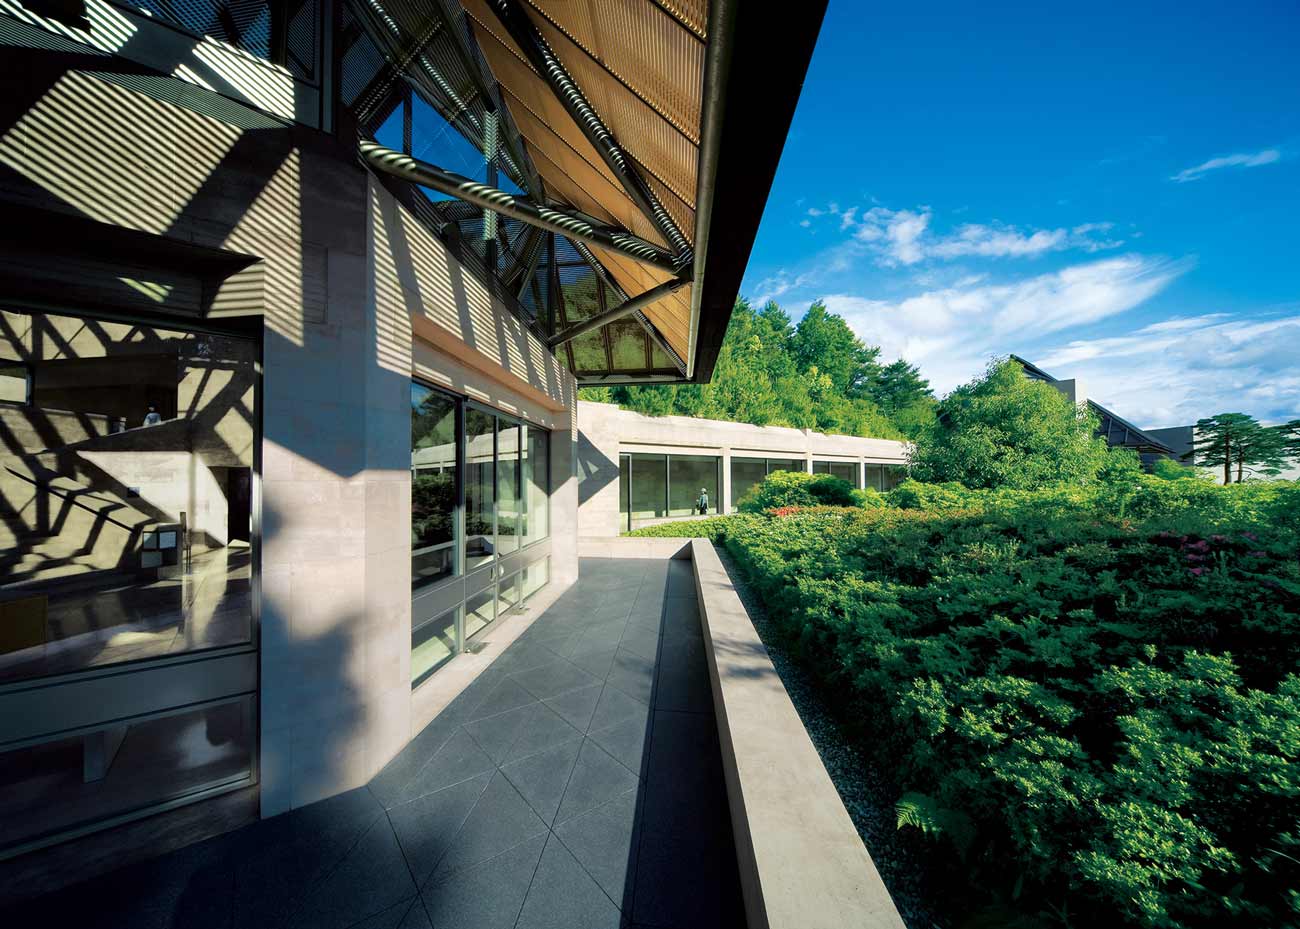 Miho Museum Admission with Private Transport from Kyoto 2023